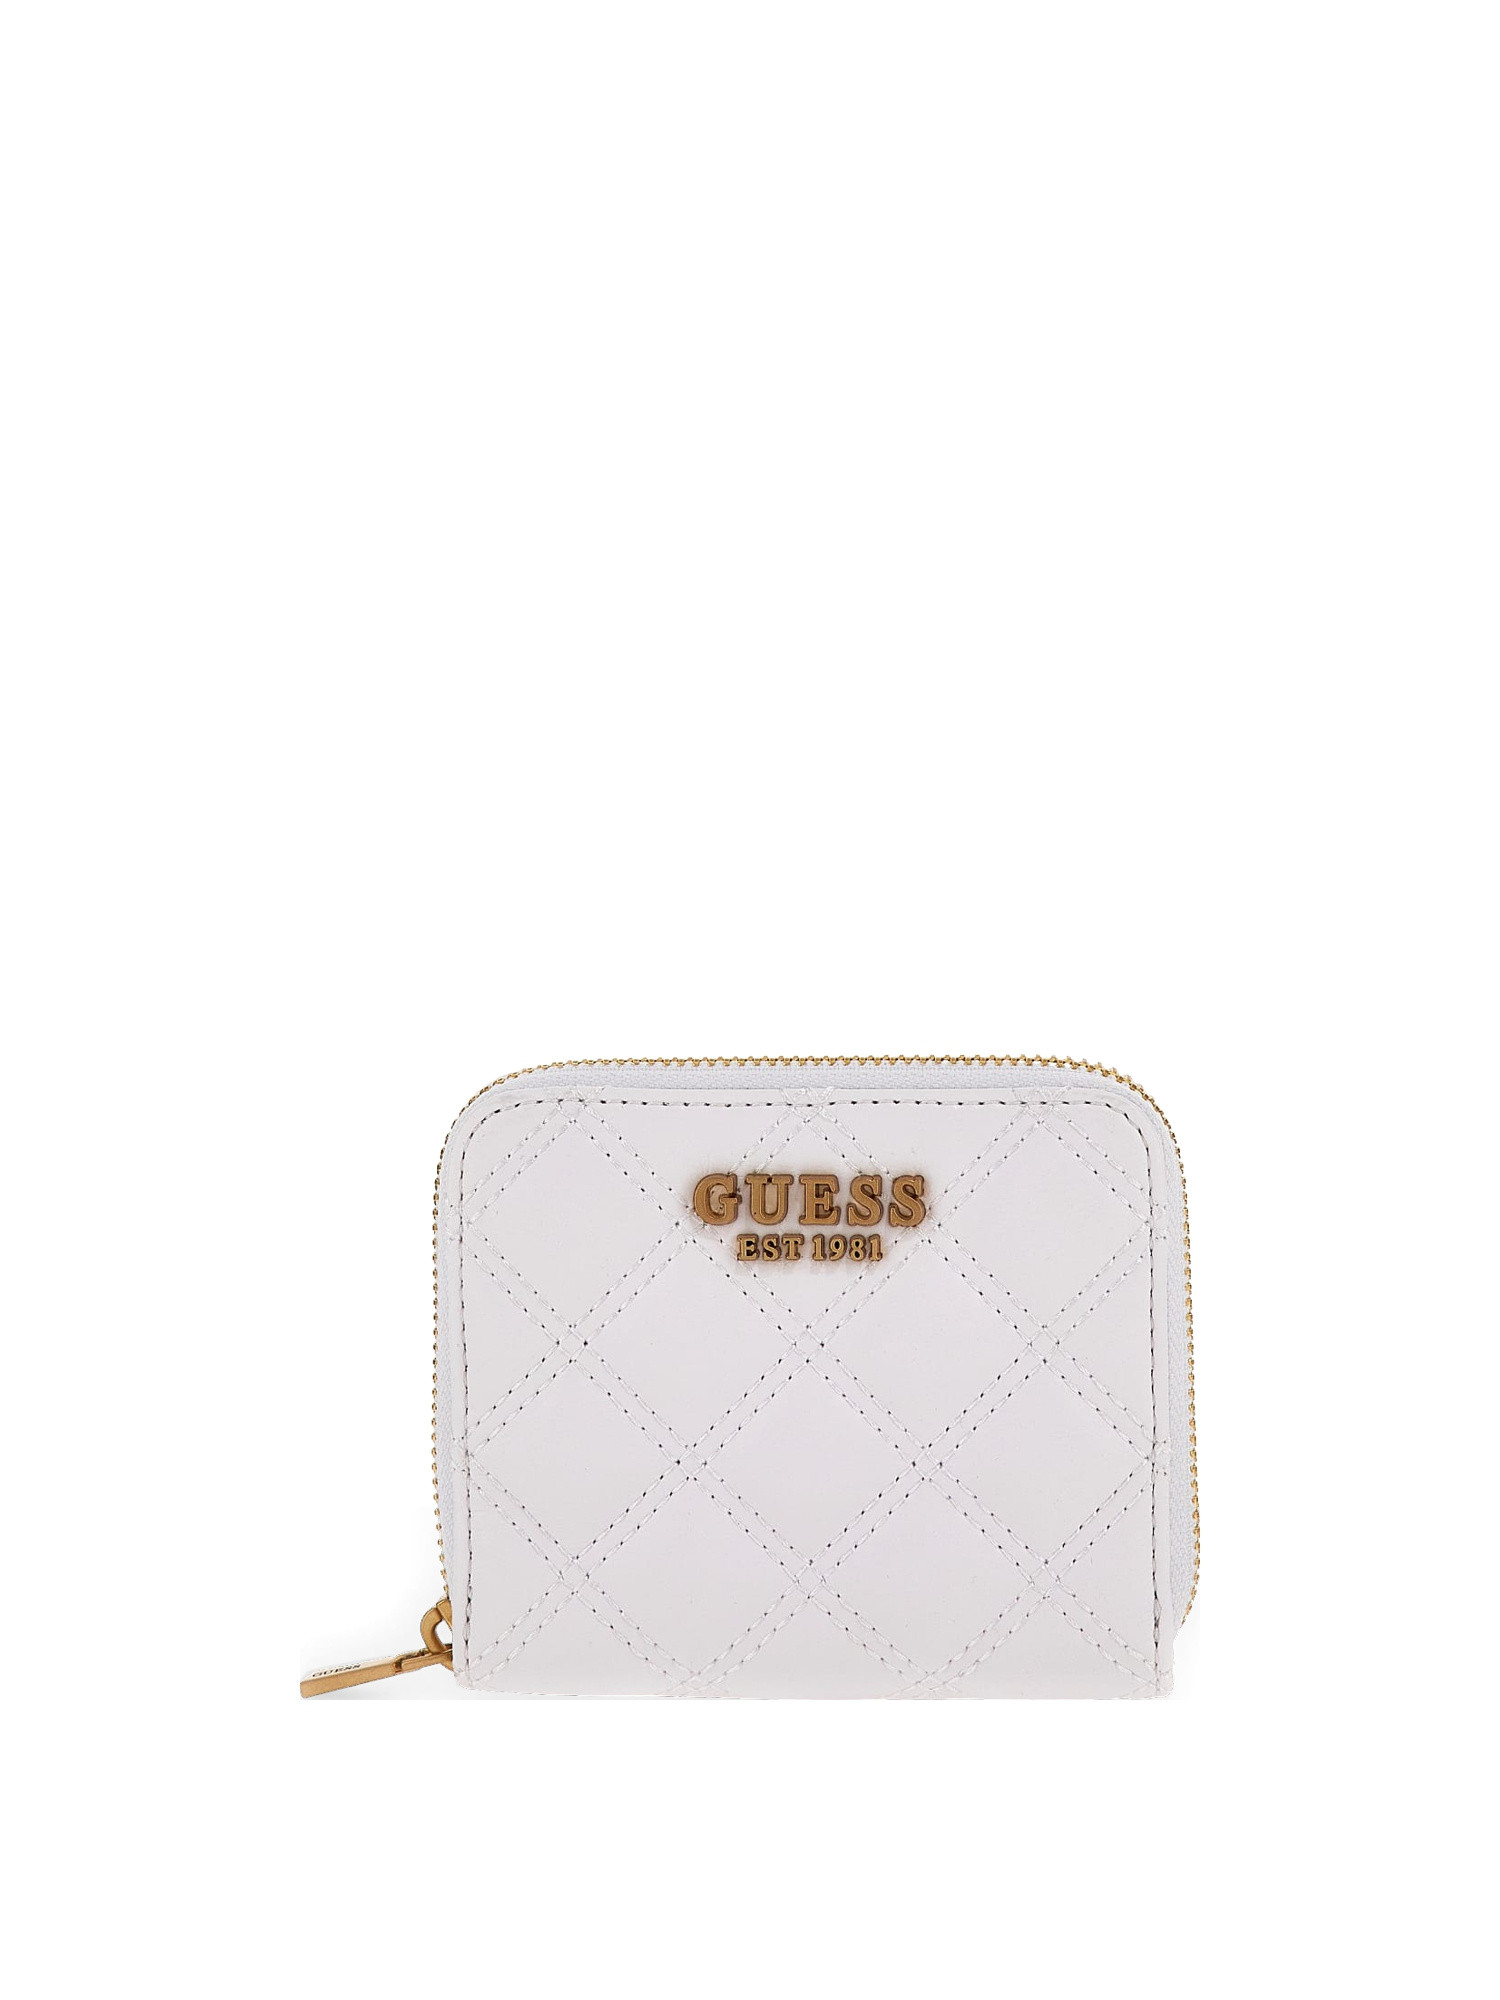 Guess - Giully quilted mini wallet, White, large image number 0